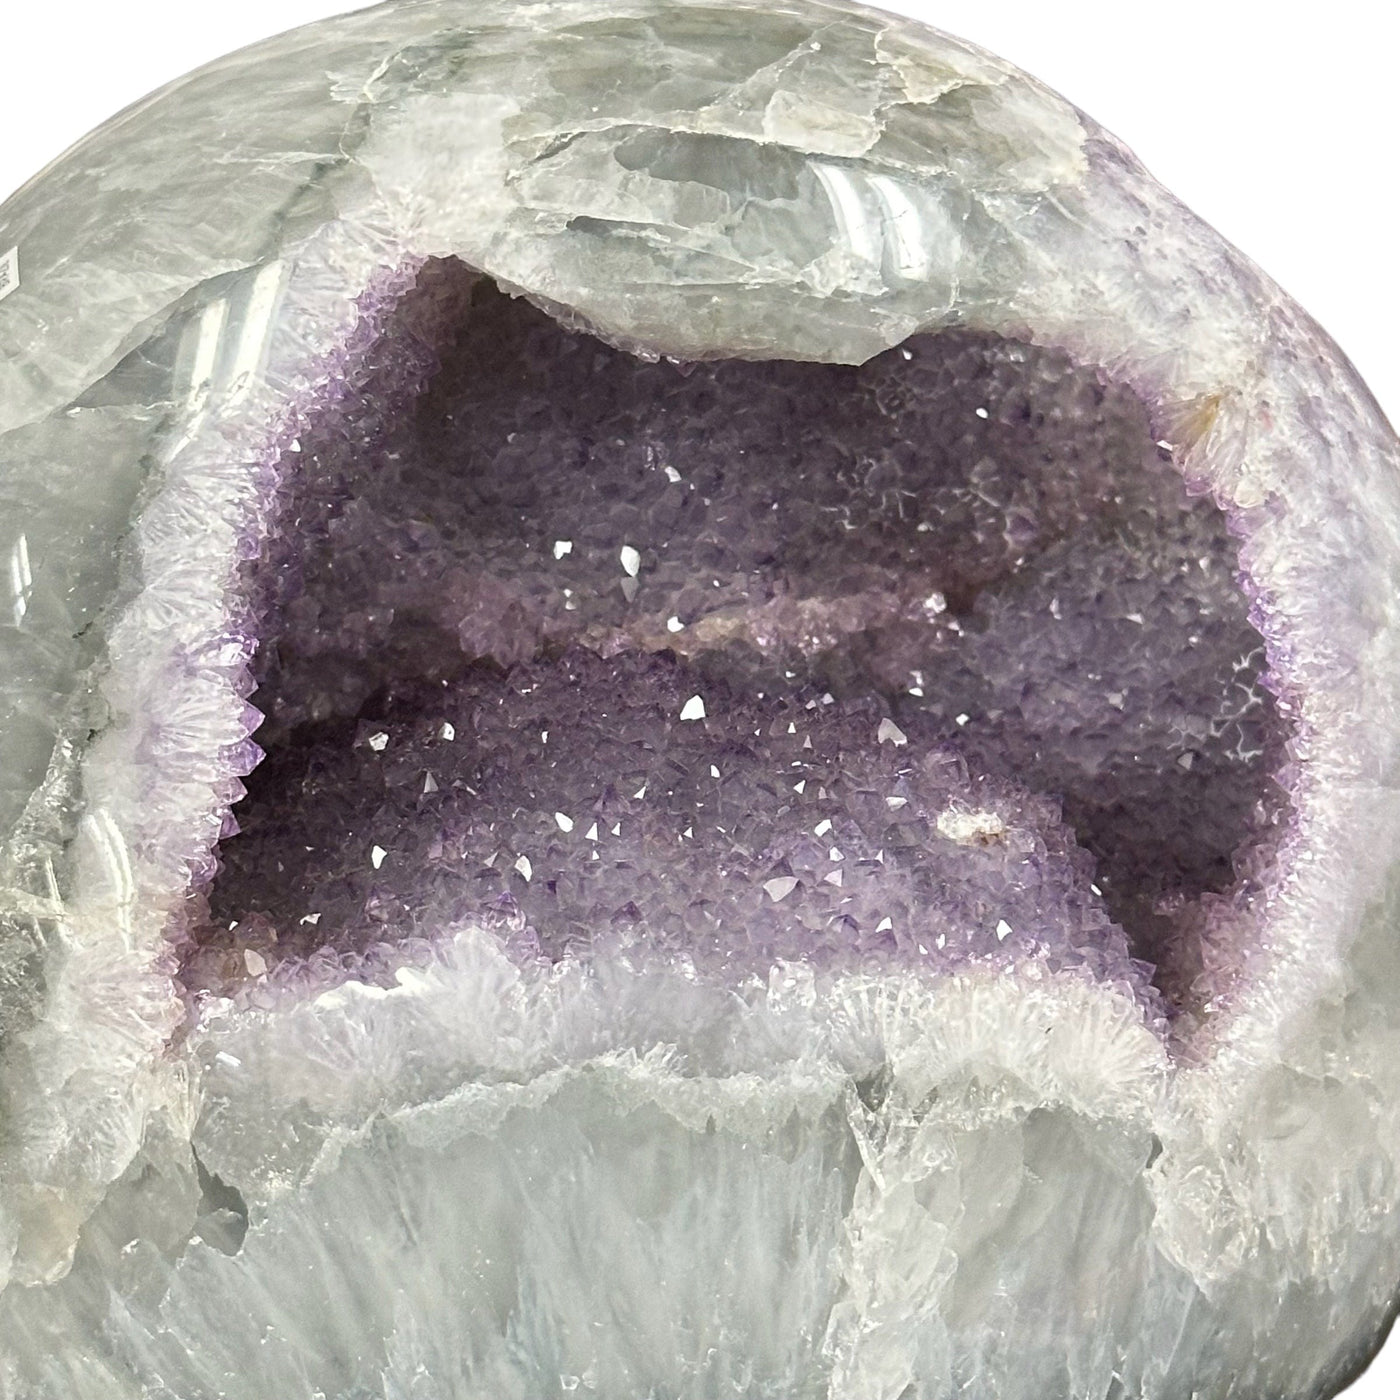 close up of the amethyst druzy 